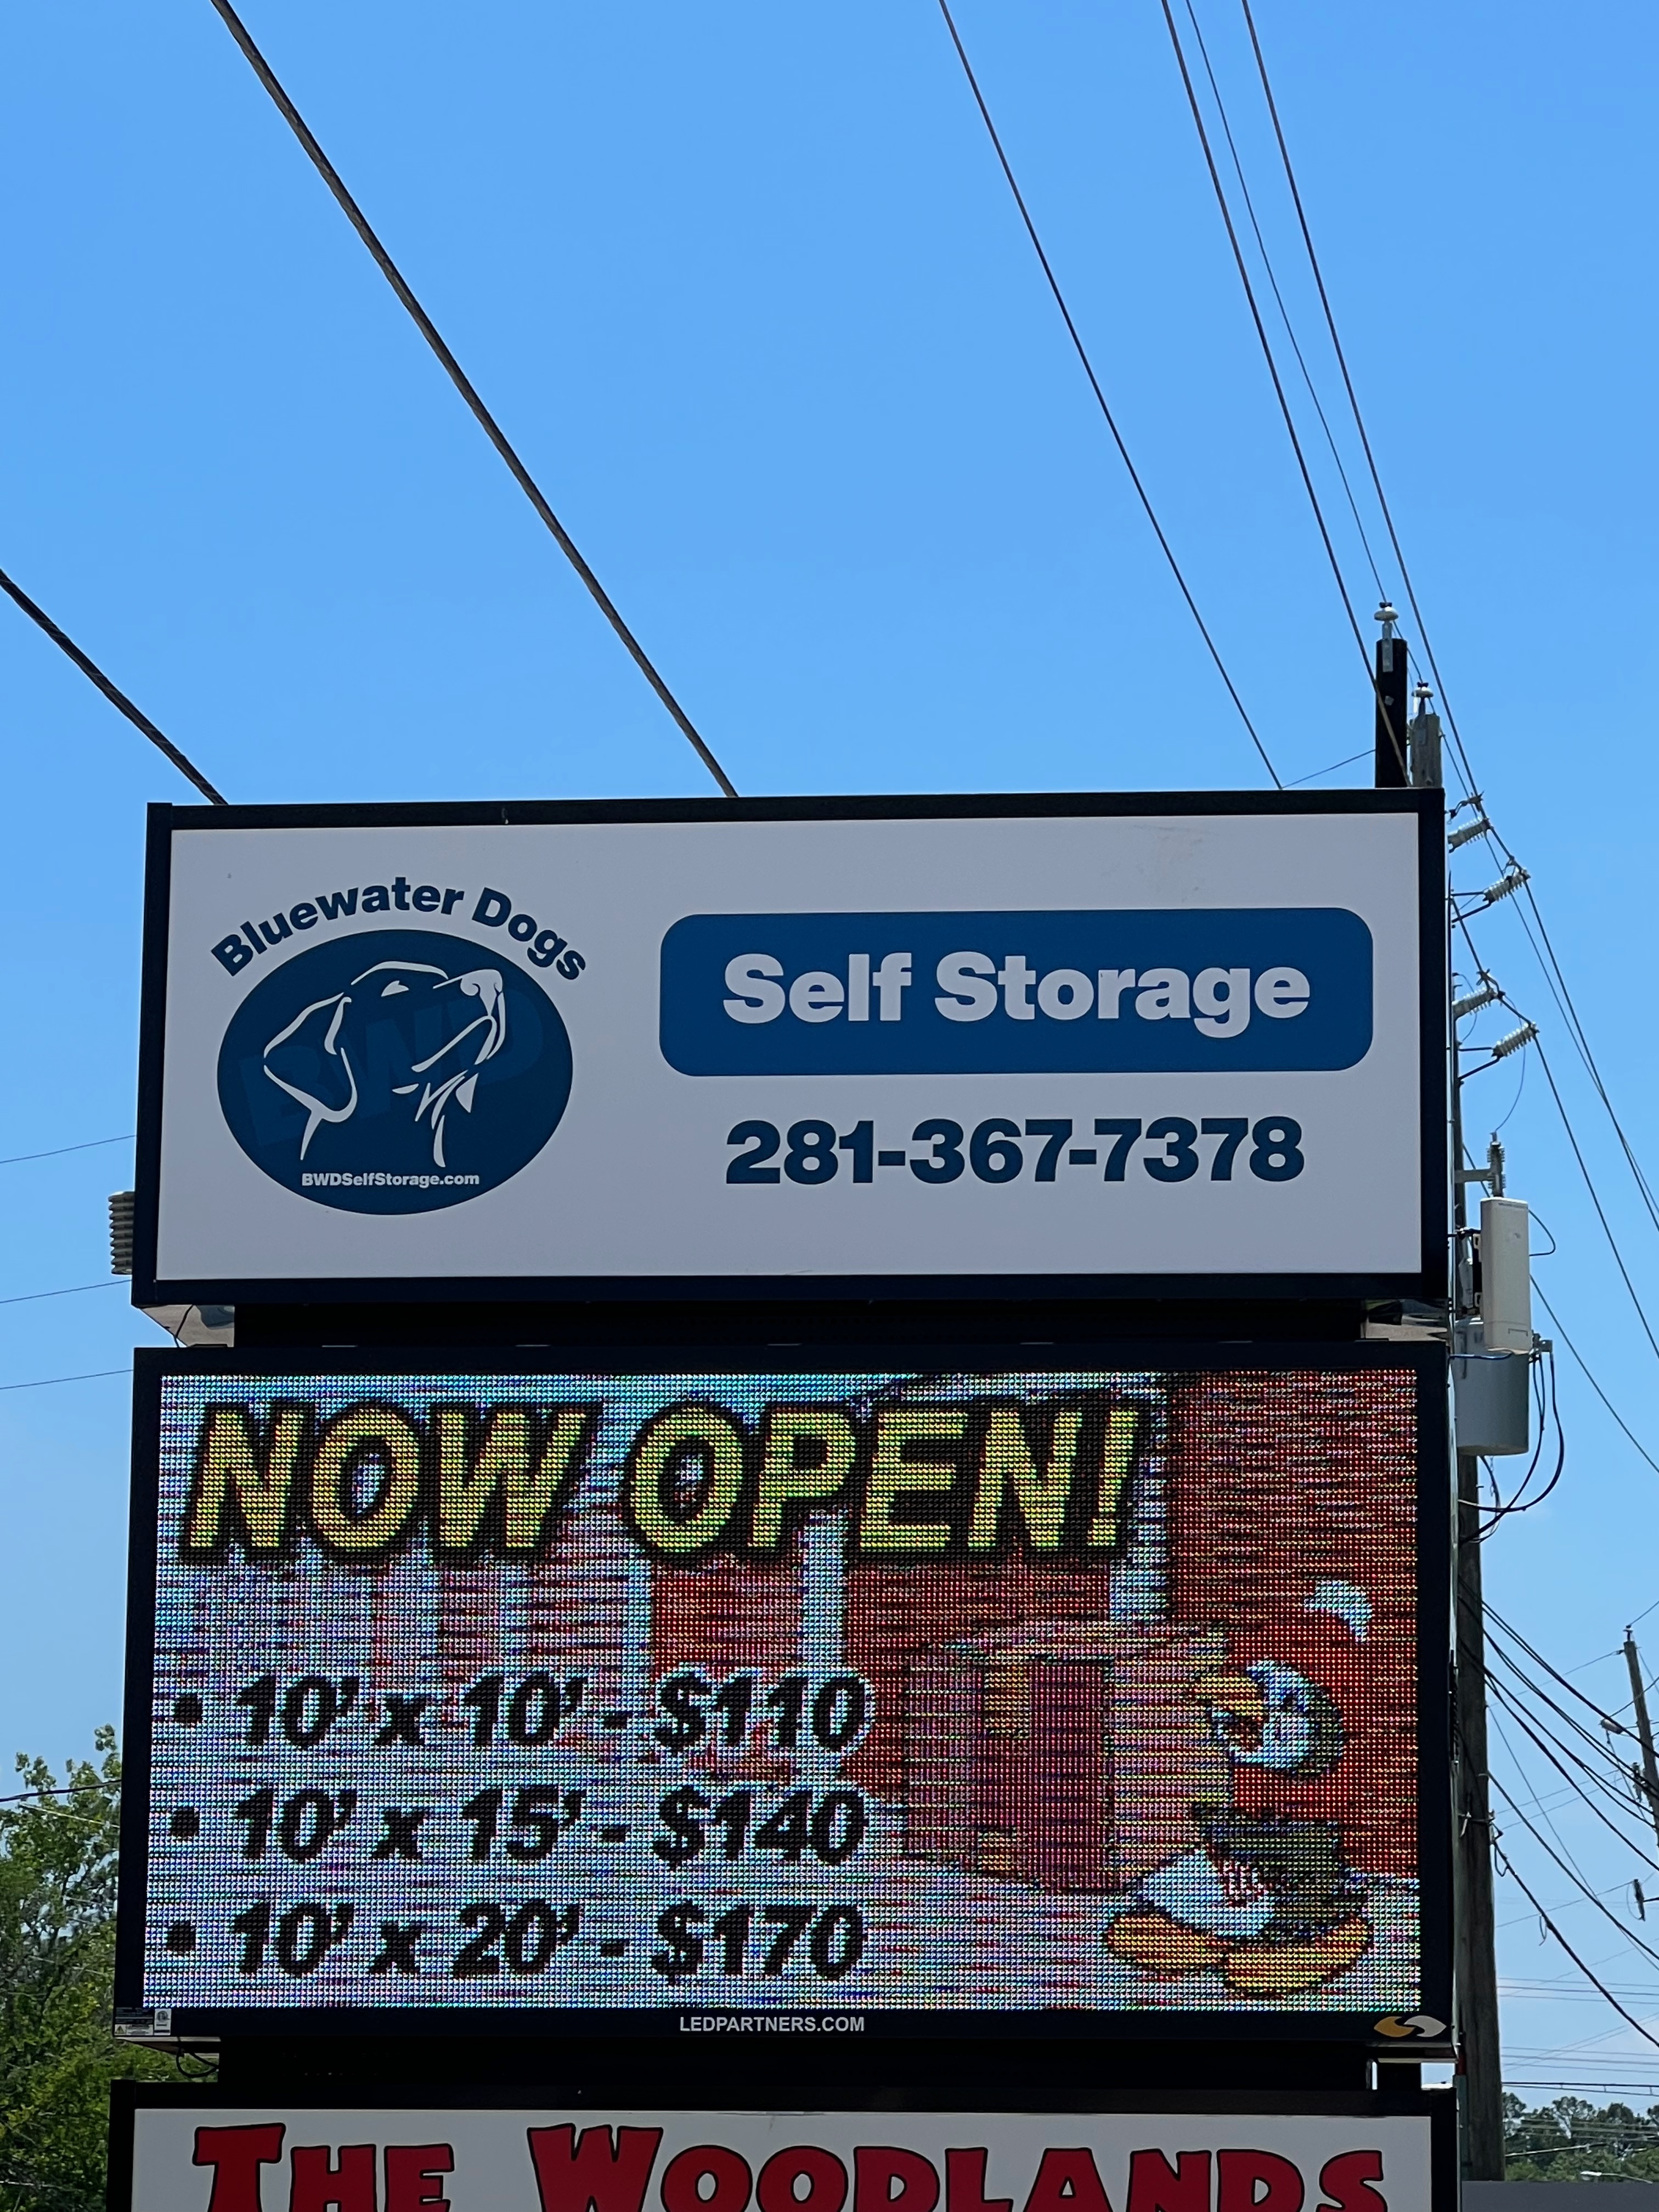 Bluewater Dogs Self Storage family, friendly service in The Woodlands!